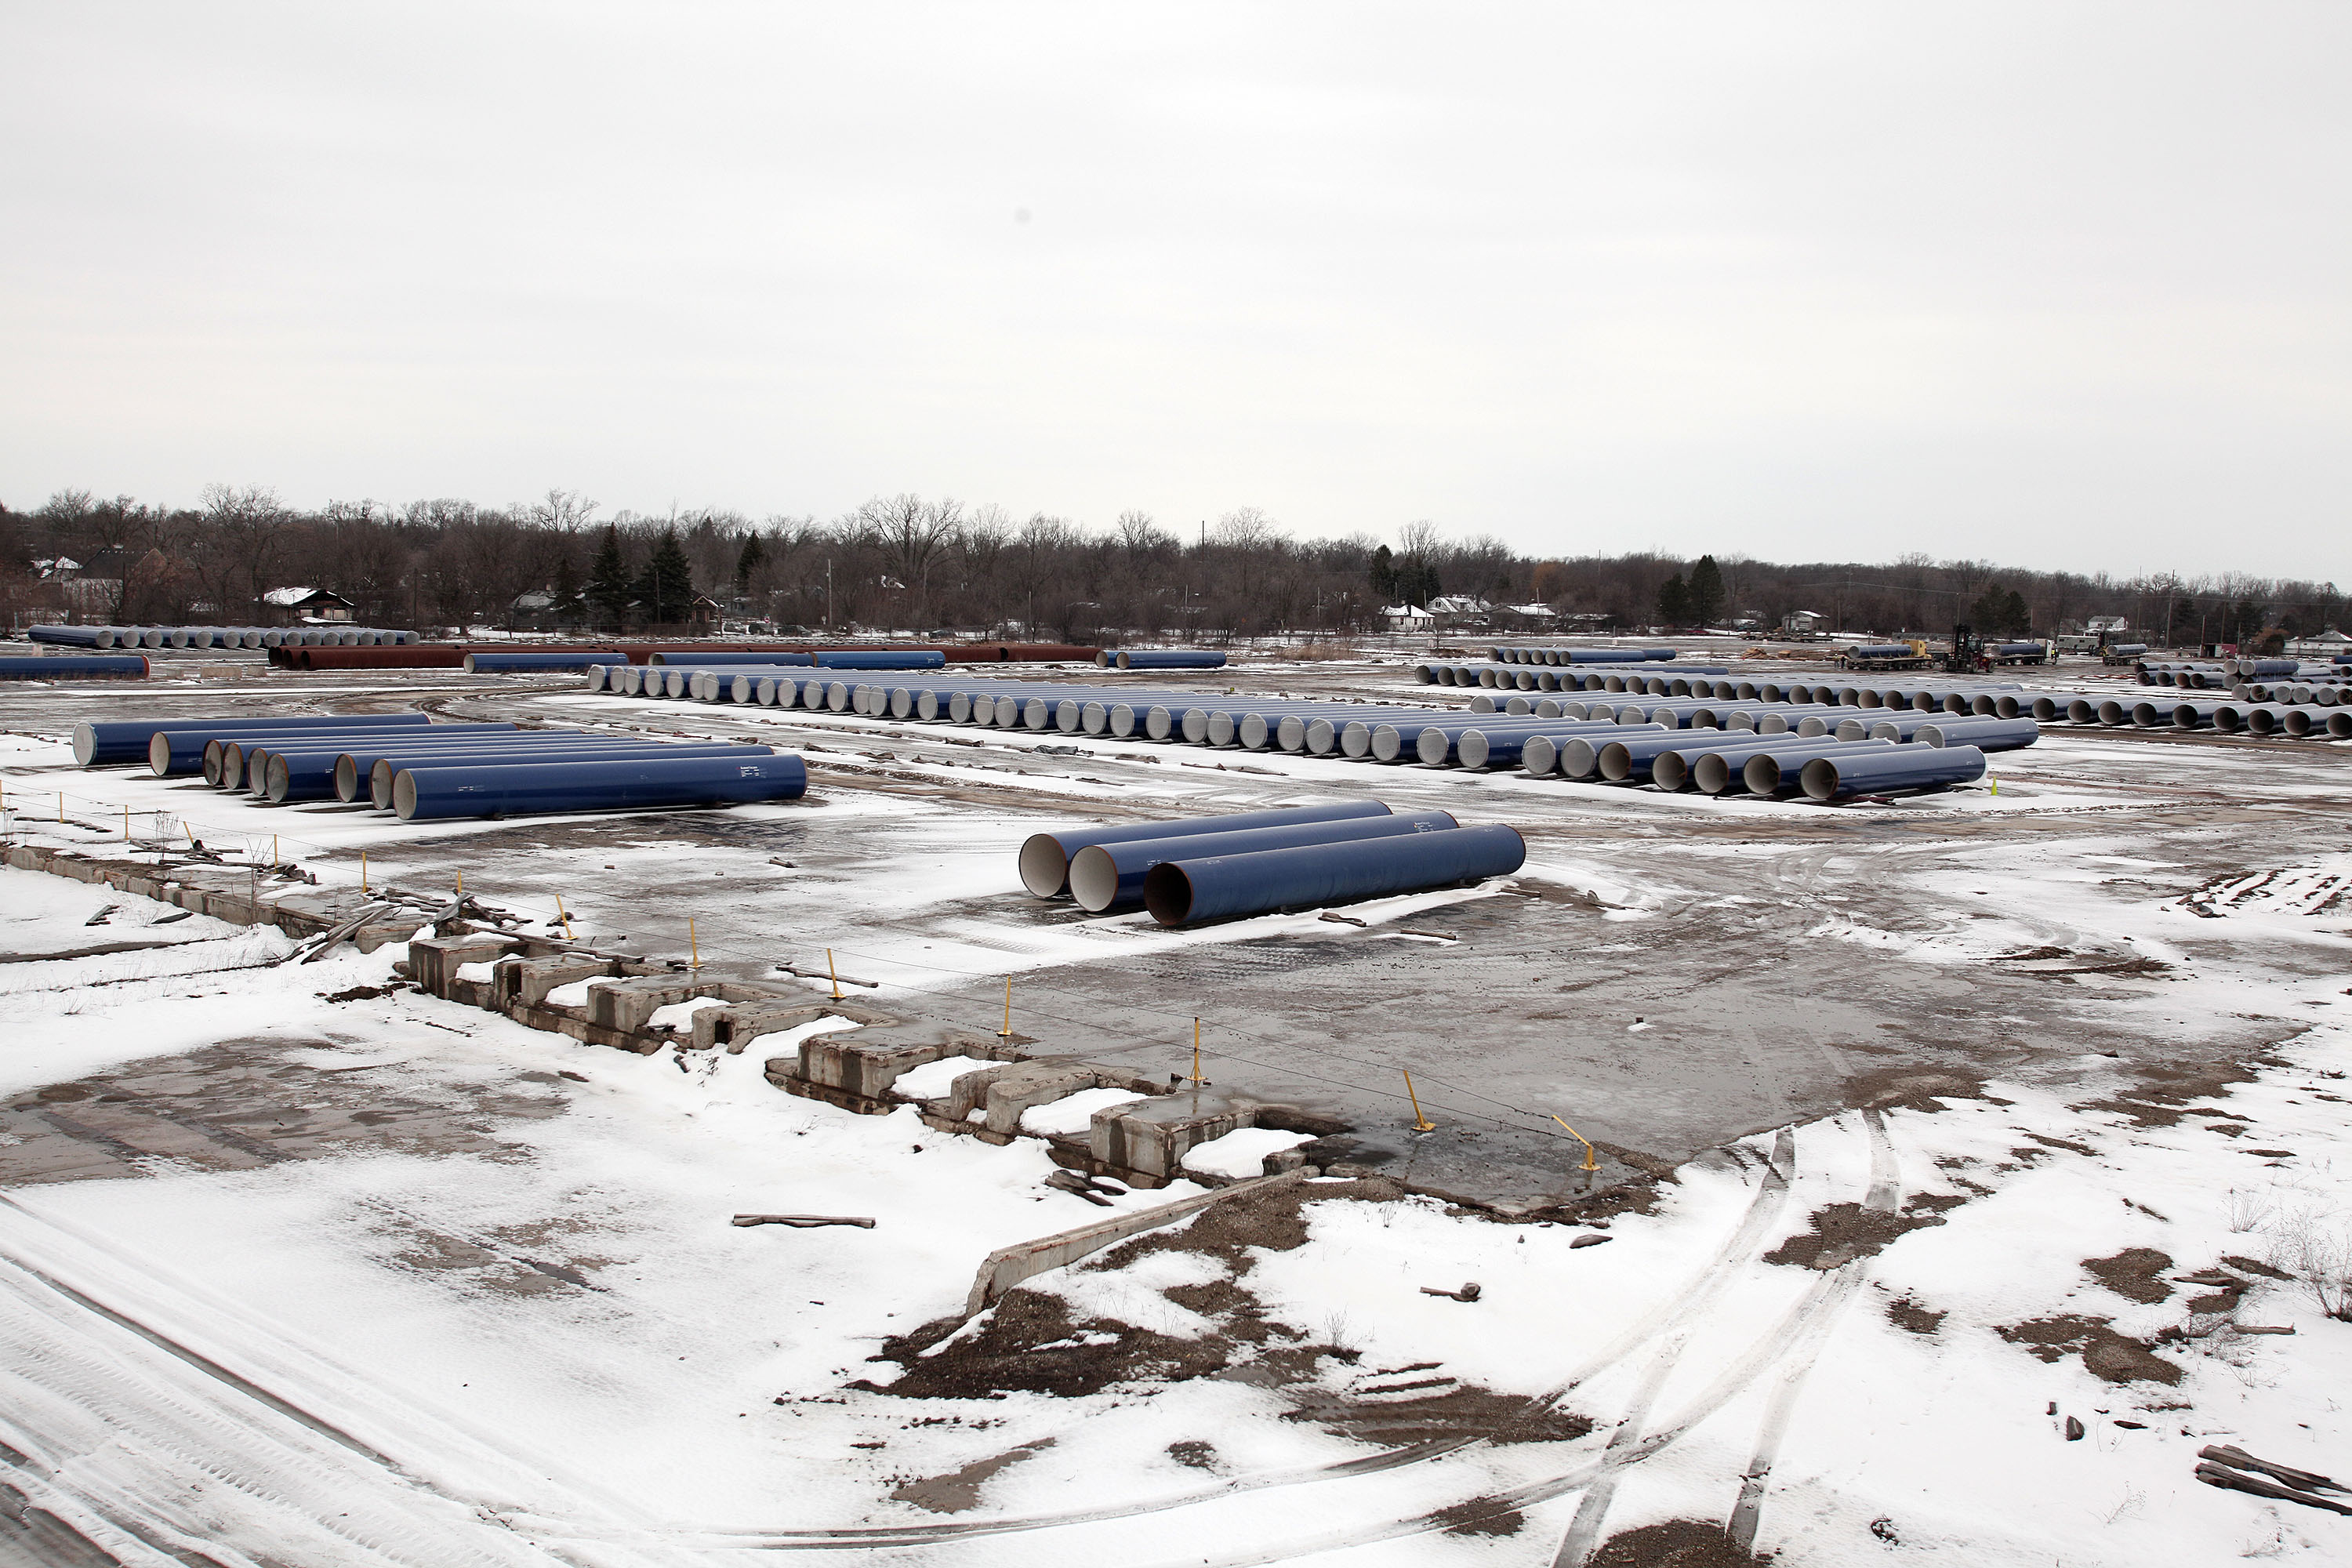 New water pipes awaiting installation are shown along the route of a national mile-long march, which was held to highlight the push for clean water in Flint, Mich., on Feb. 19, 2016.